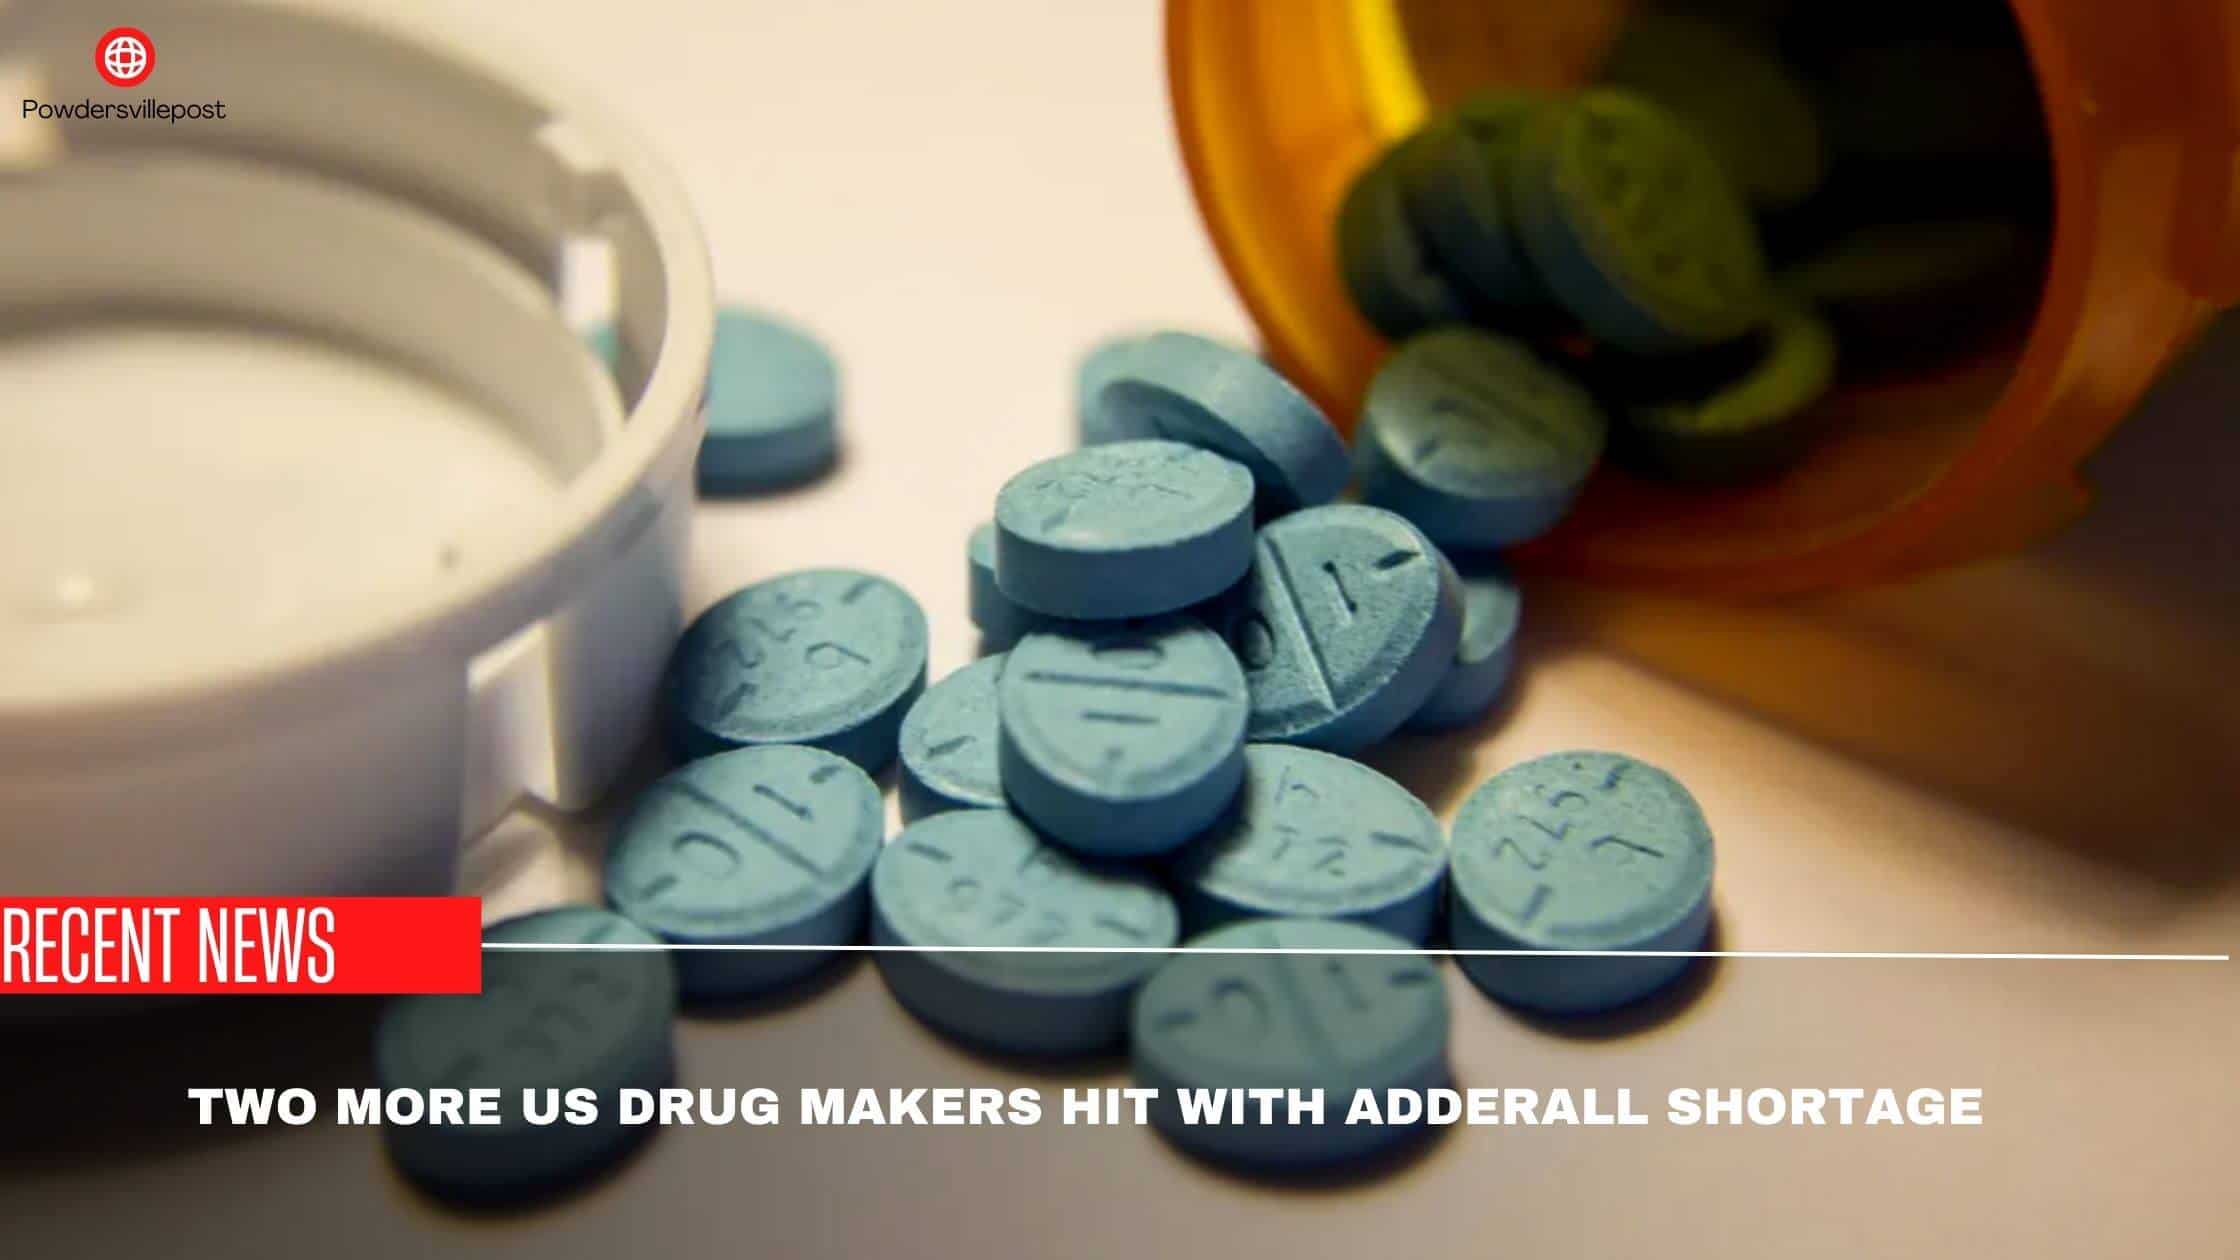 Two More US Drug Makers Hit With Adderall Shortage